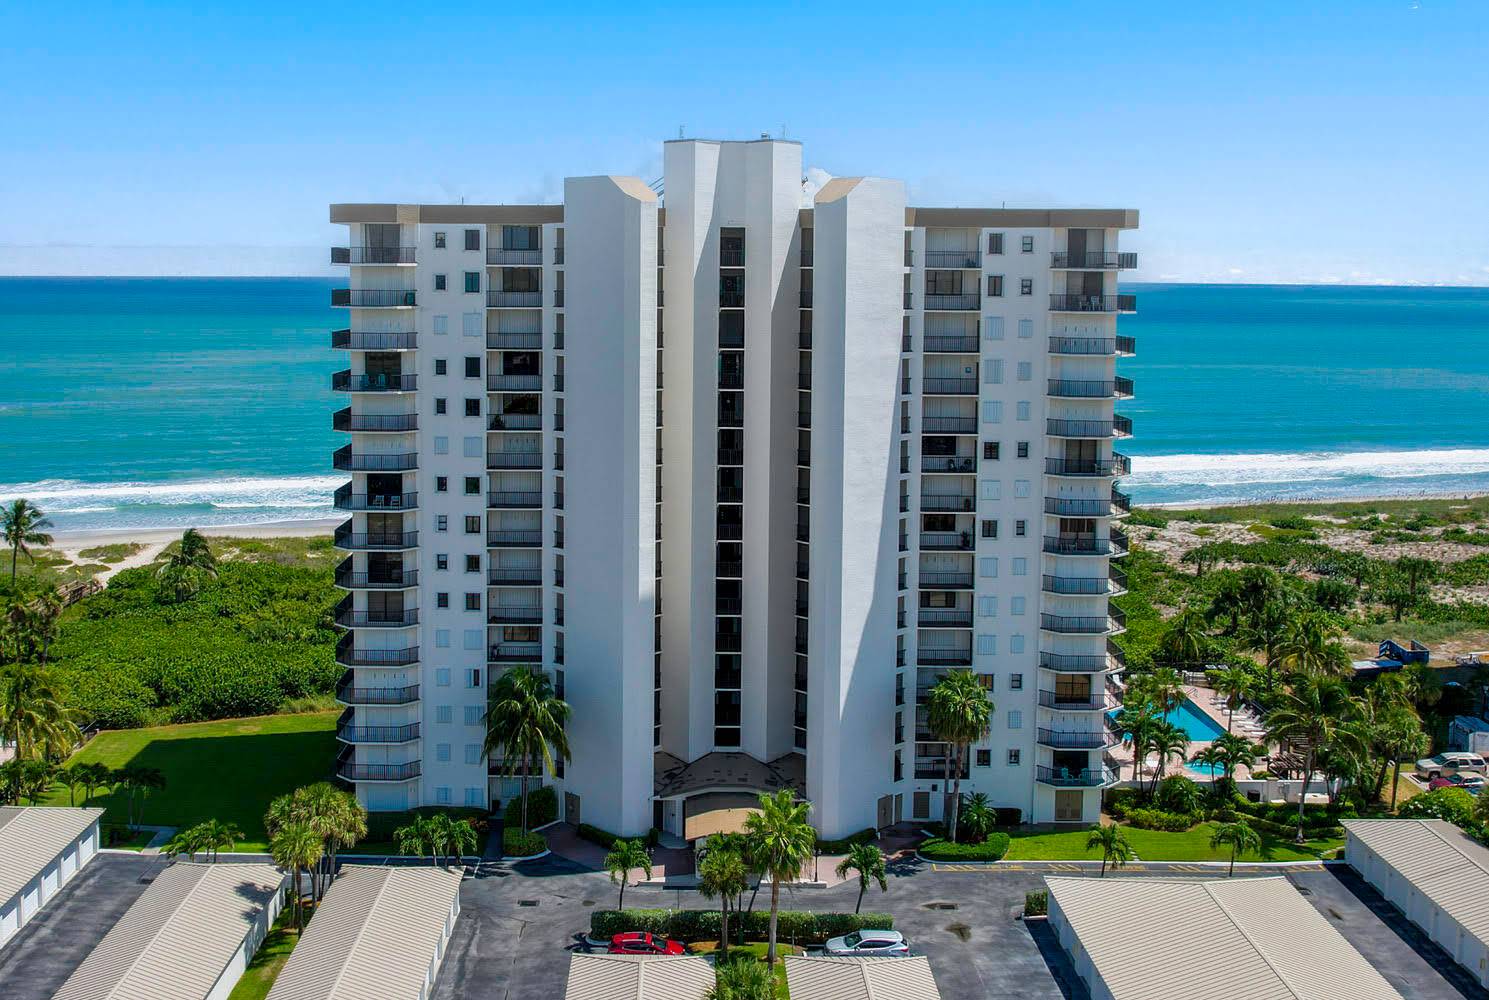 Nature lovers dream. Nestled on the picturesque Hutchinson Island, this exceptional 3 bedroom, 2 bathroom end unit condo is a true gem of coastal living.